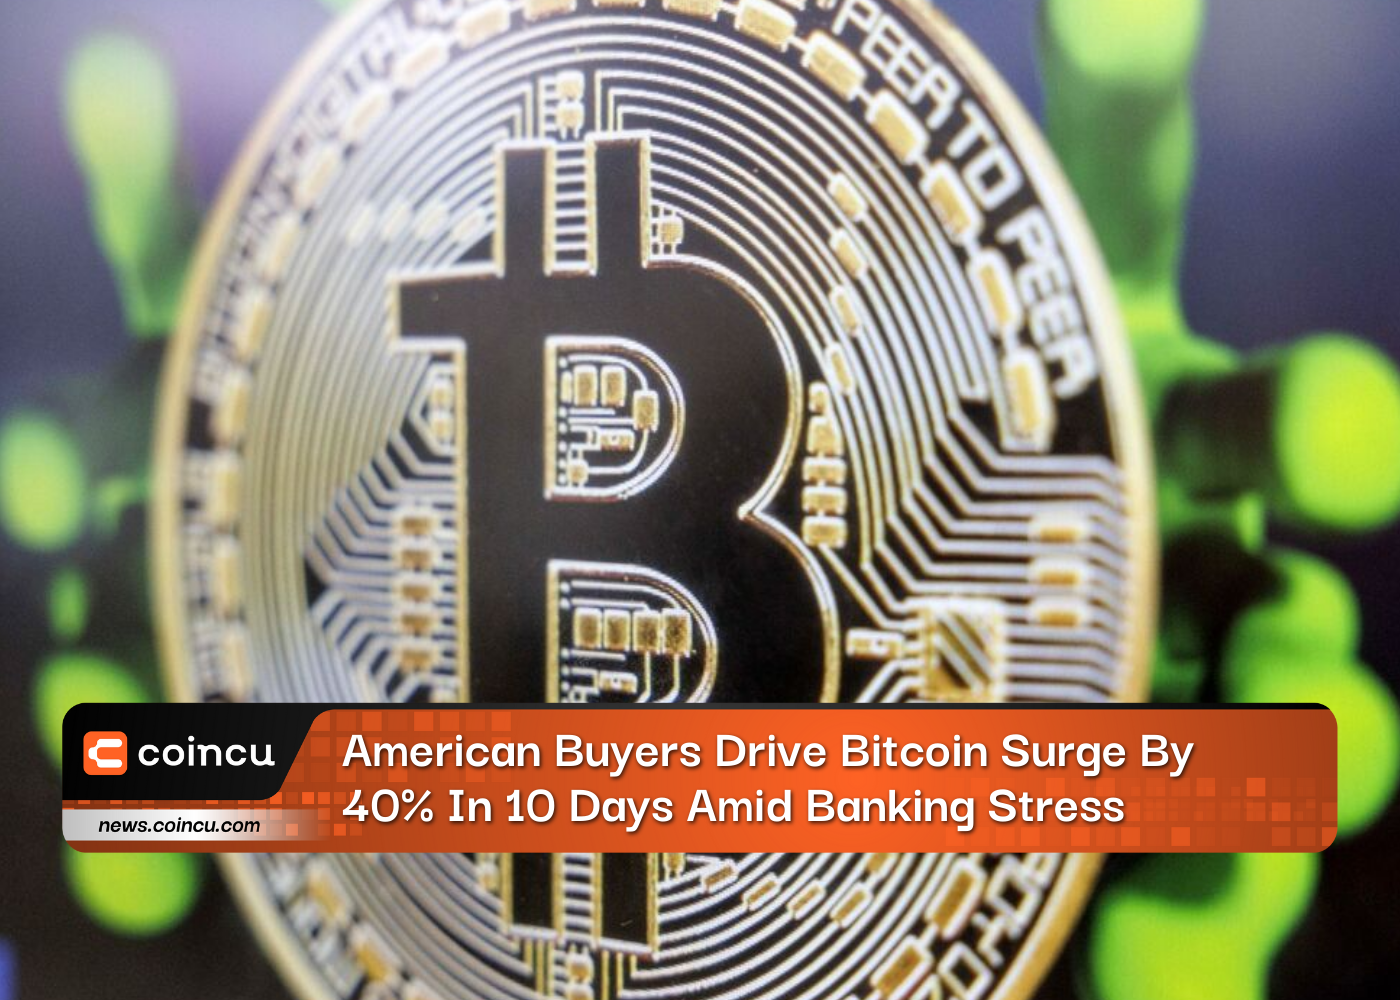 American Buyers Drive Bitcoin Surge By 40% In 10 Days Amid Banking Stress